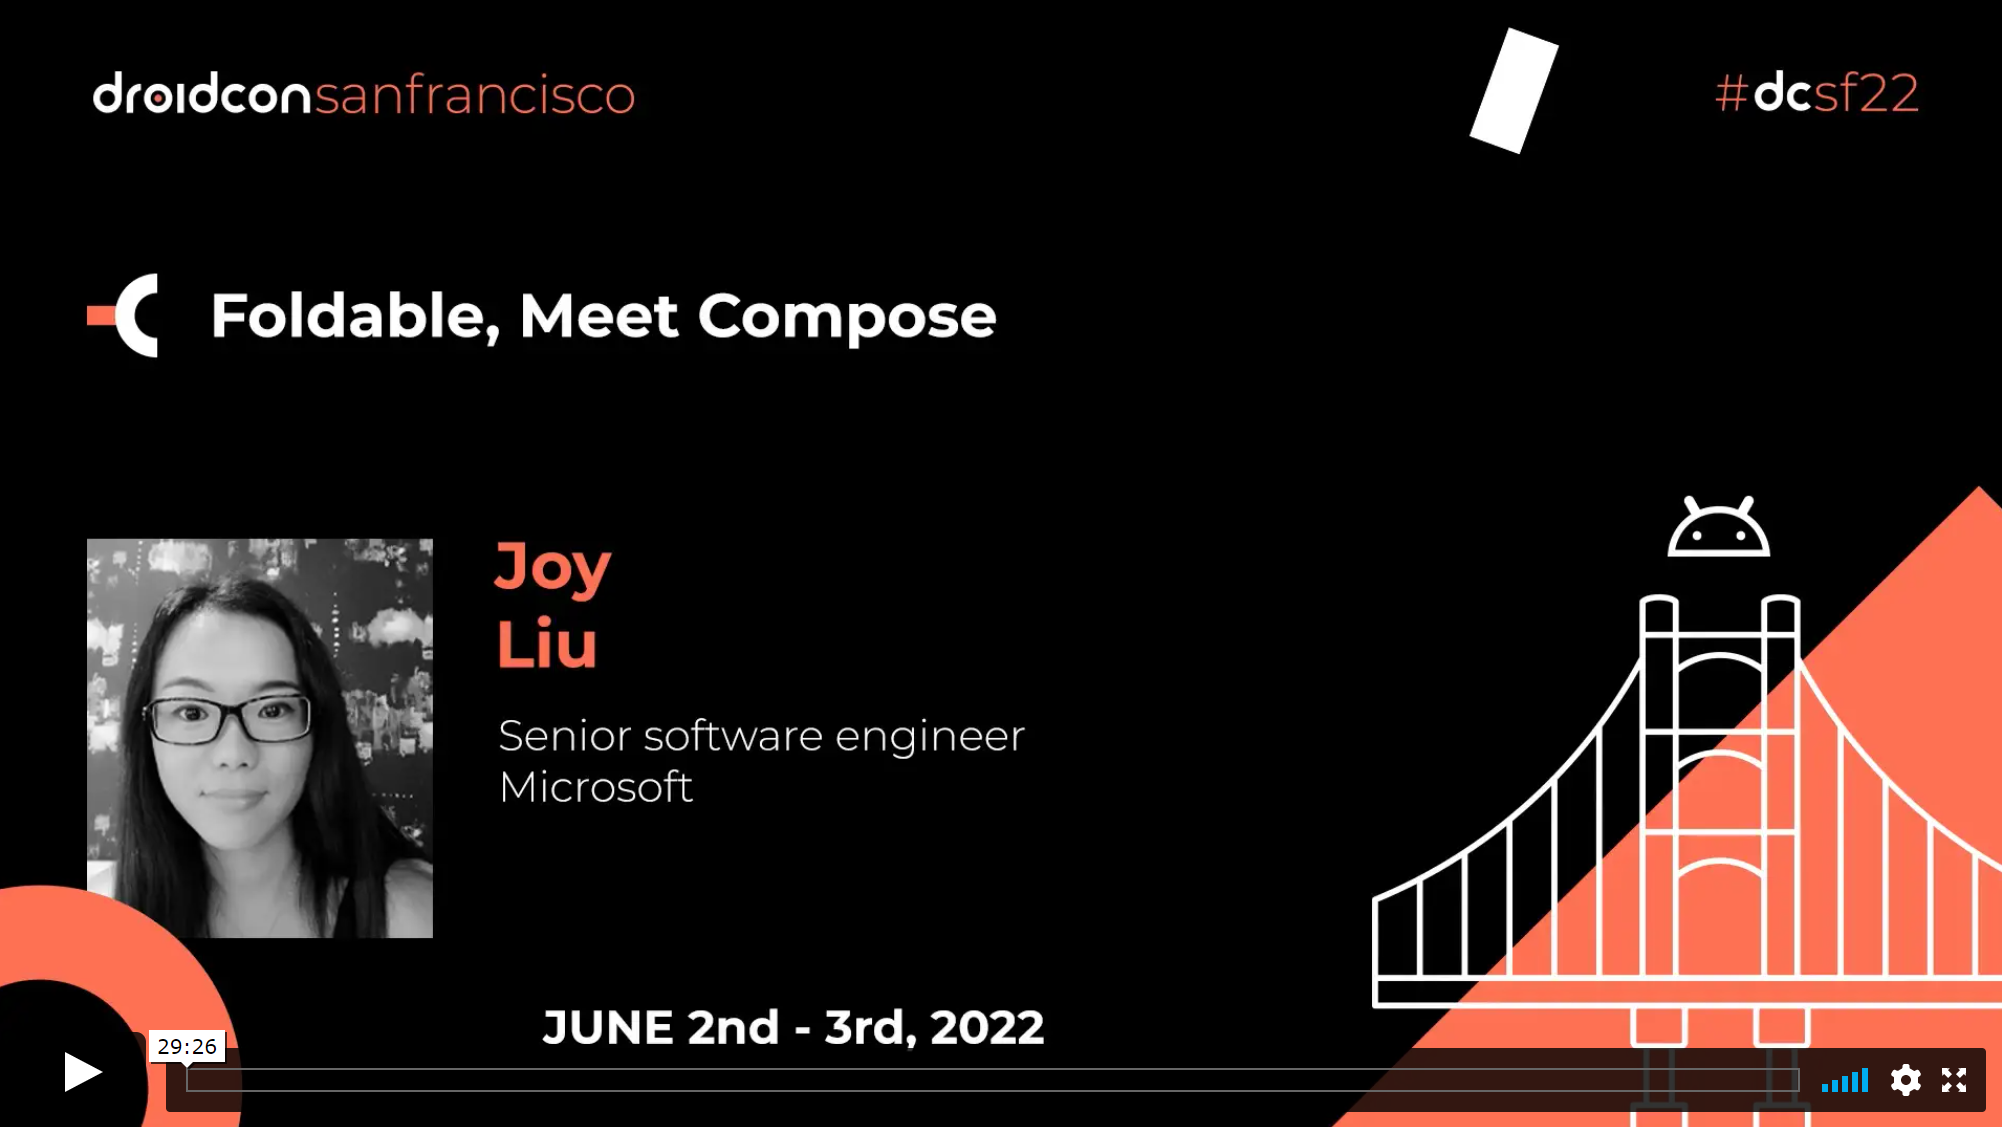 Intoductory slide from Foldable meet Compose talk, showing Joy's photo and Senior Software Engineer title